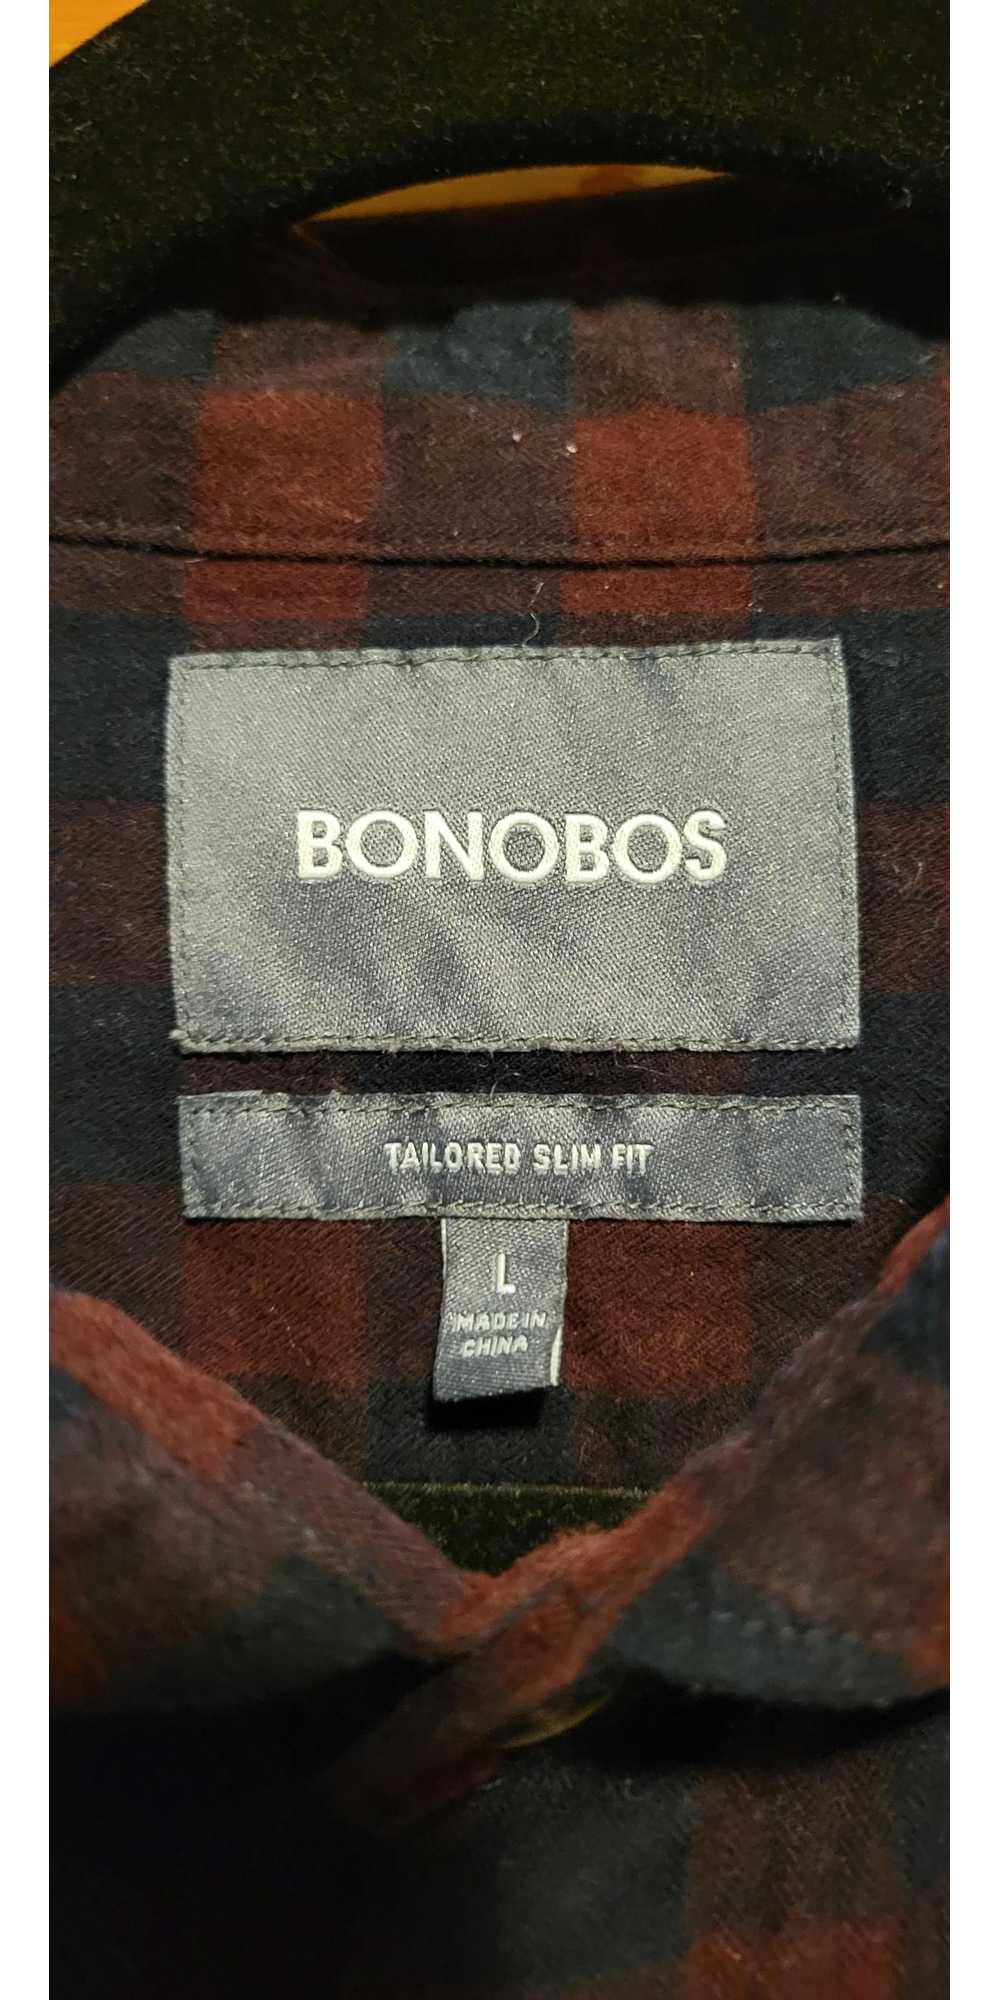 Bonobos Check Flannel - Tailored Slim Fit - image 3